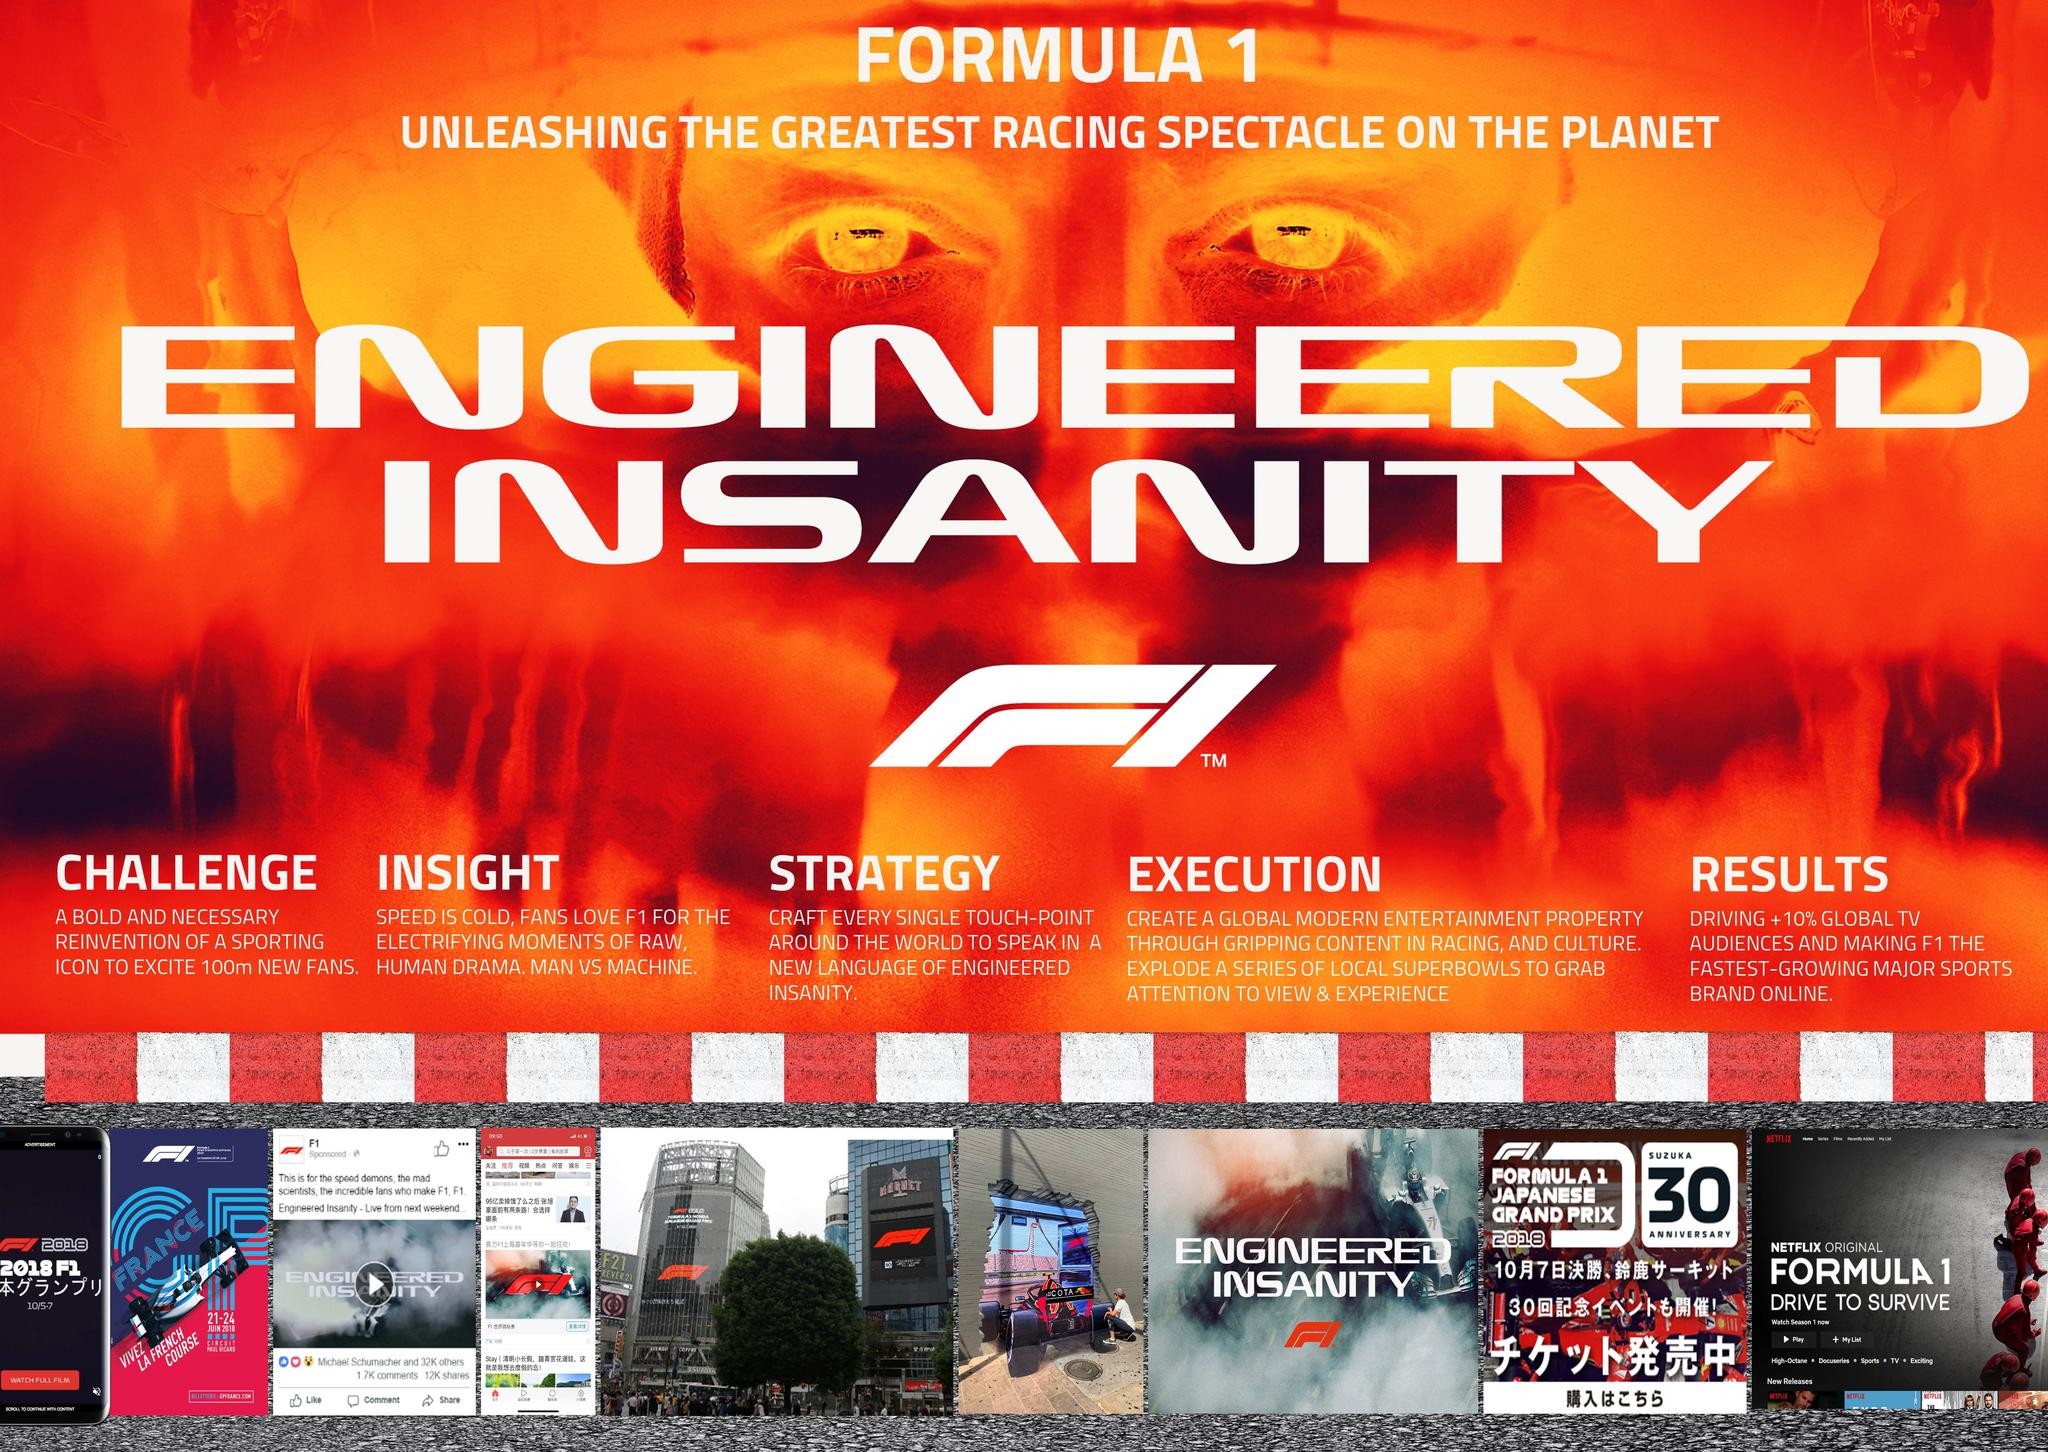 Formula 1: Unleashing the greatest racing spectacle on the planet